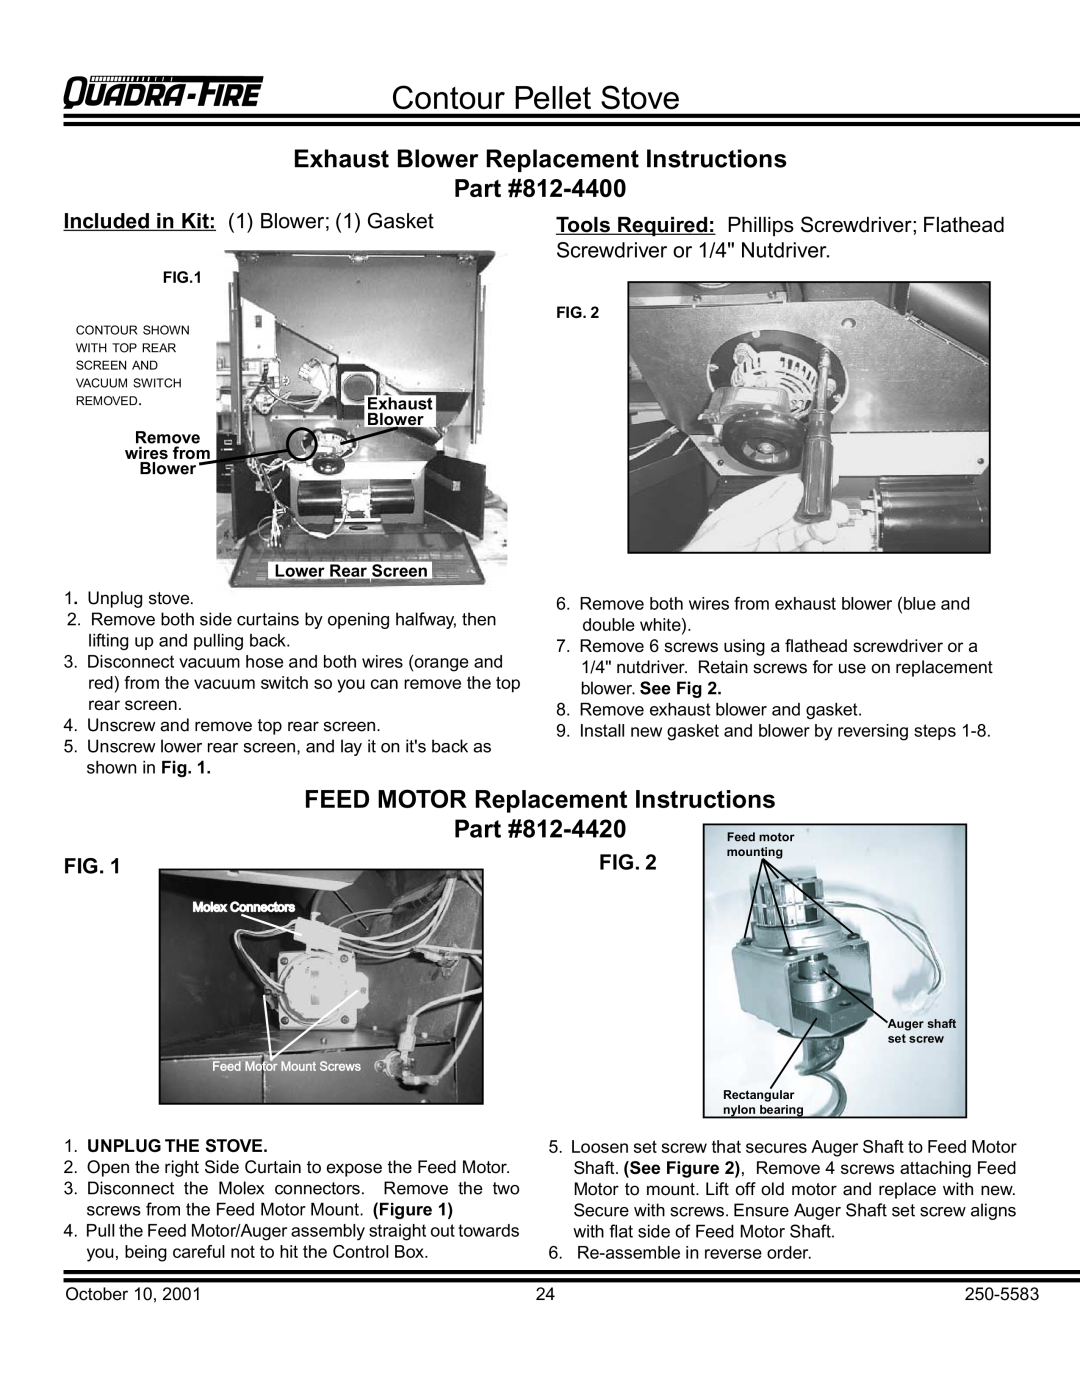 Quadra-Fire QUADRA-FIRE CONTOUR Exhaust Blower Replacement Instructions, 812-4400, FEED MOTOR Replacement Instructions 